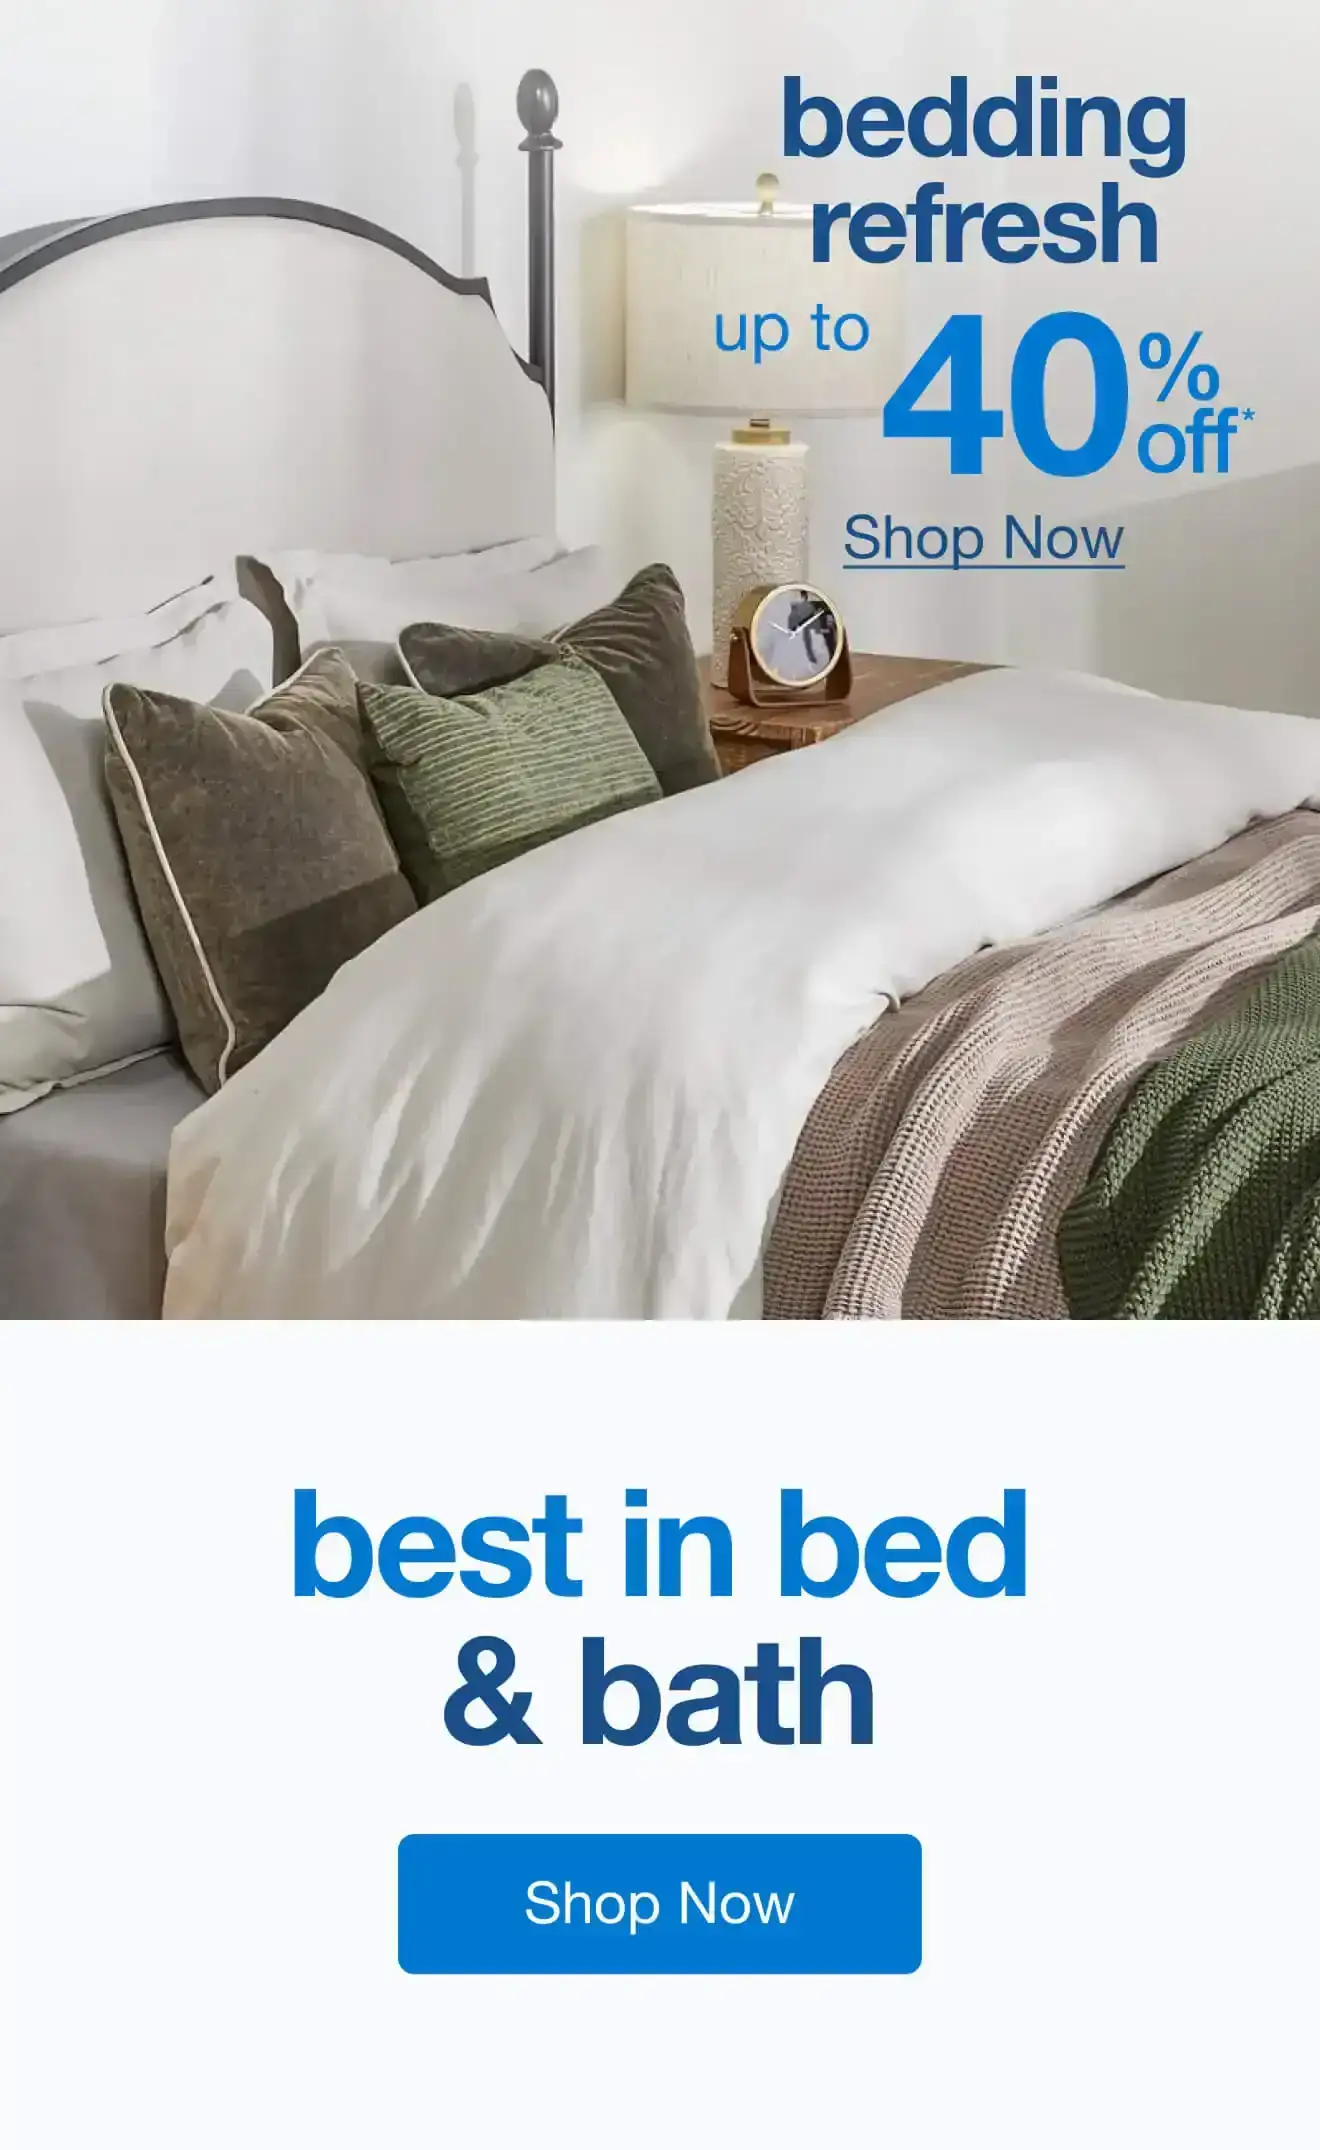 Up to 40% Off* Bedding — Shop Now!